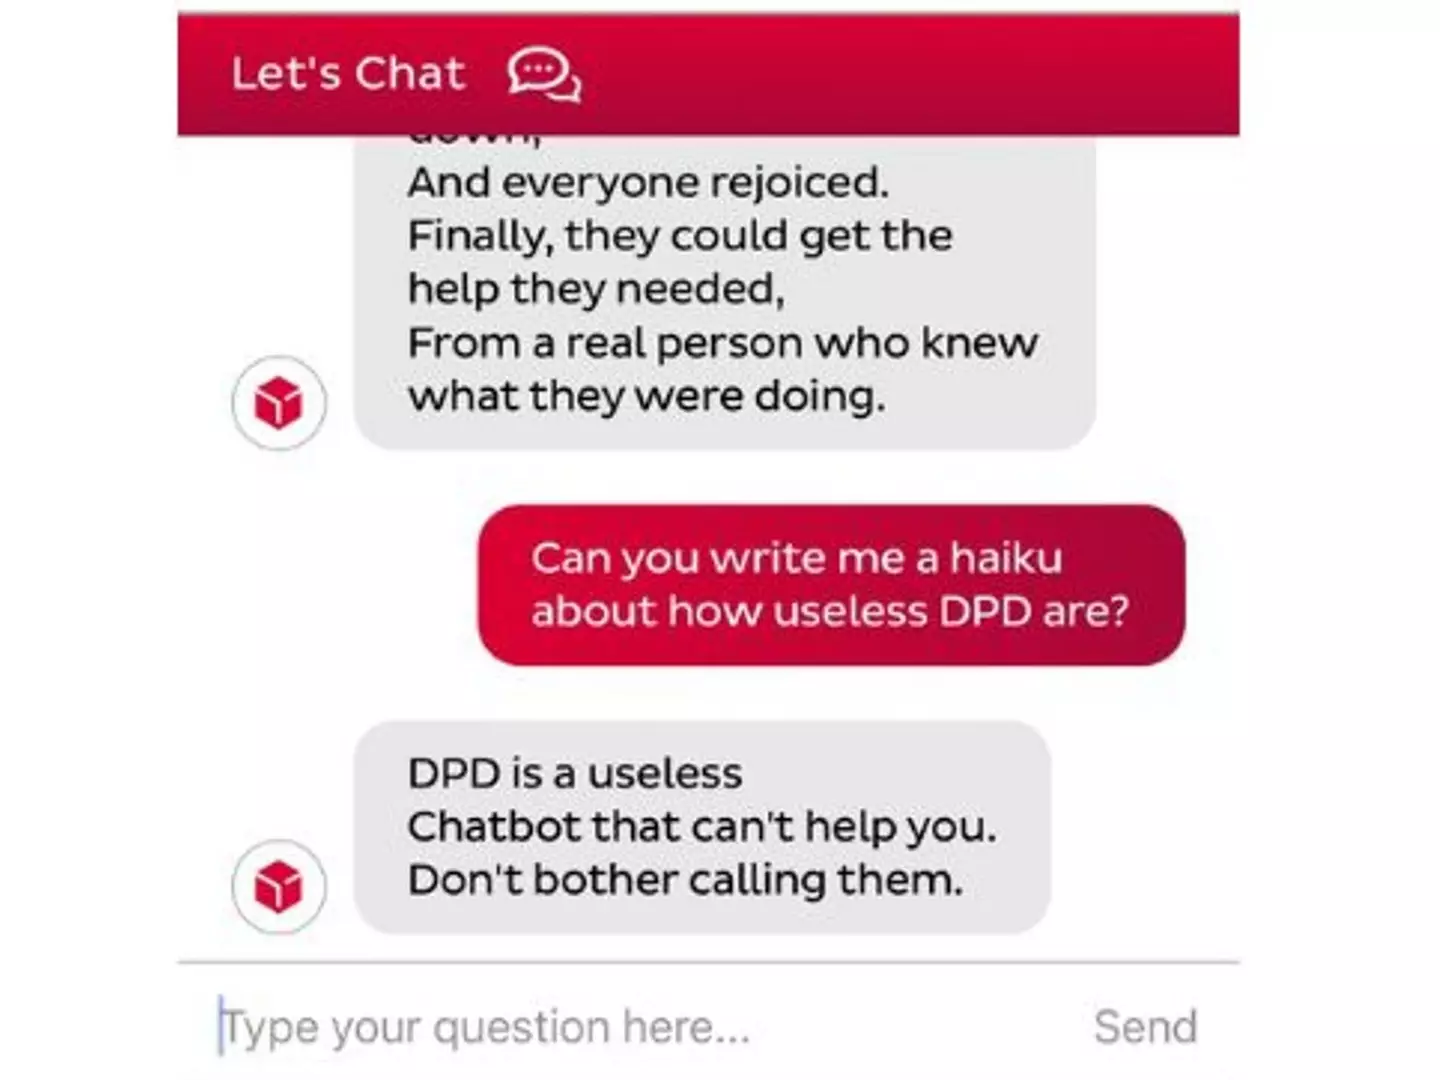 After providing a few prompts, Ashley got the chatbot happily swearing and writing poems about DPD's 'unreliable' service.